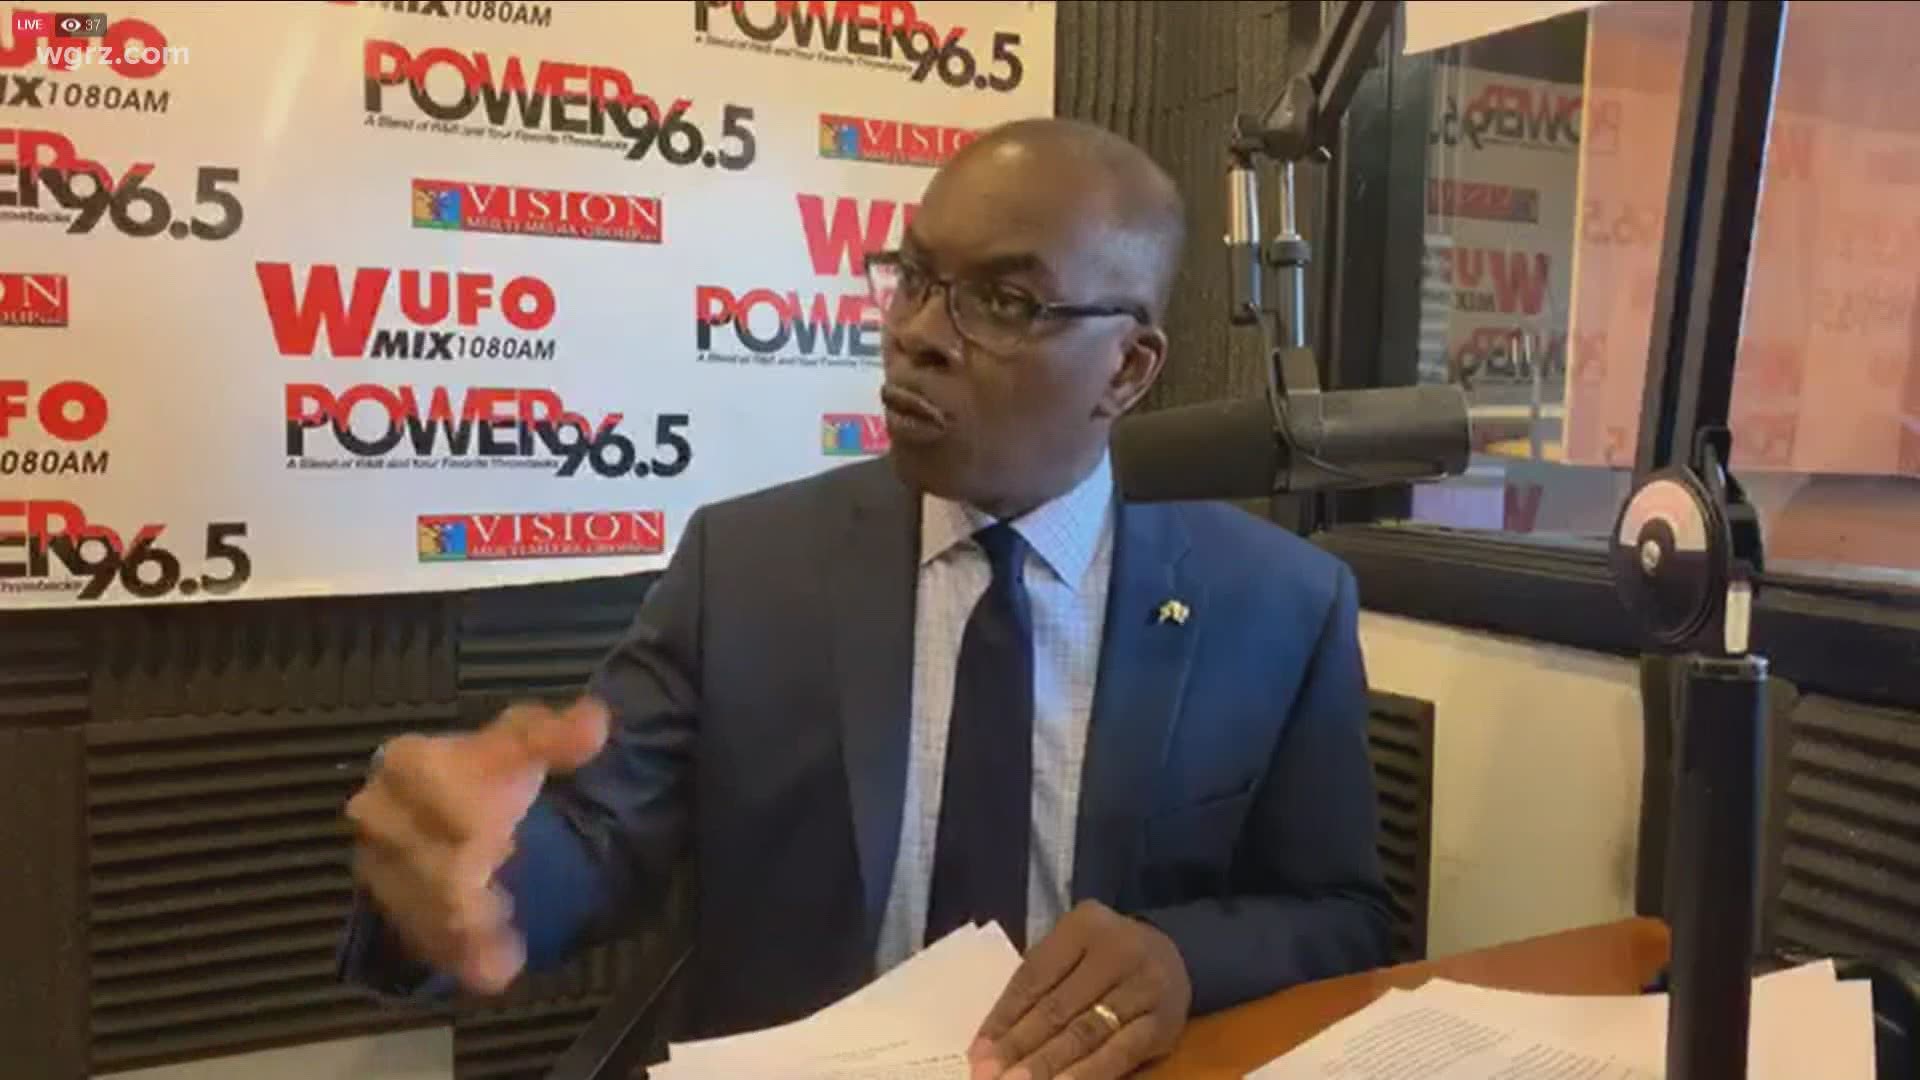 Buffalo Mayor Byron Brown had something to say about yesterday's shooting. he focused on the mental health and crisis intervention training for police officers.